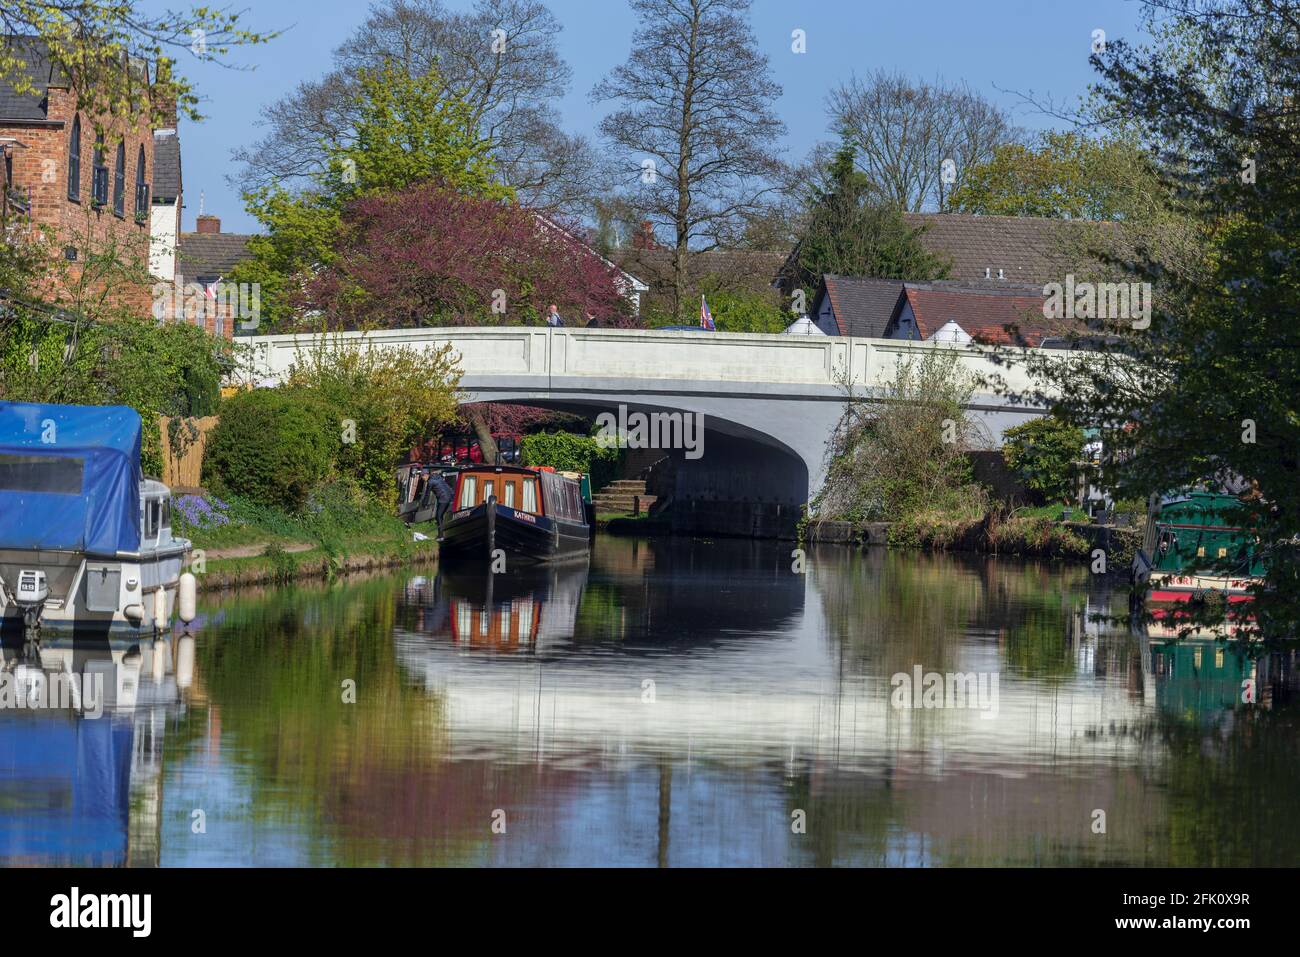 Canal narrowboats on the Bridgewater canal at Stockton Heath on a springtime afternoon by the London Road bridge on the A49. Stock Photo